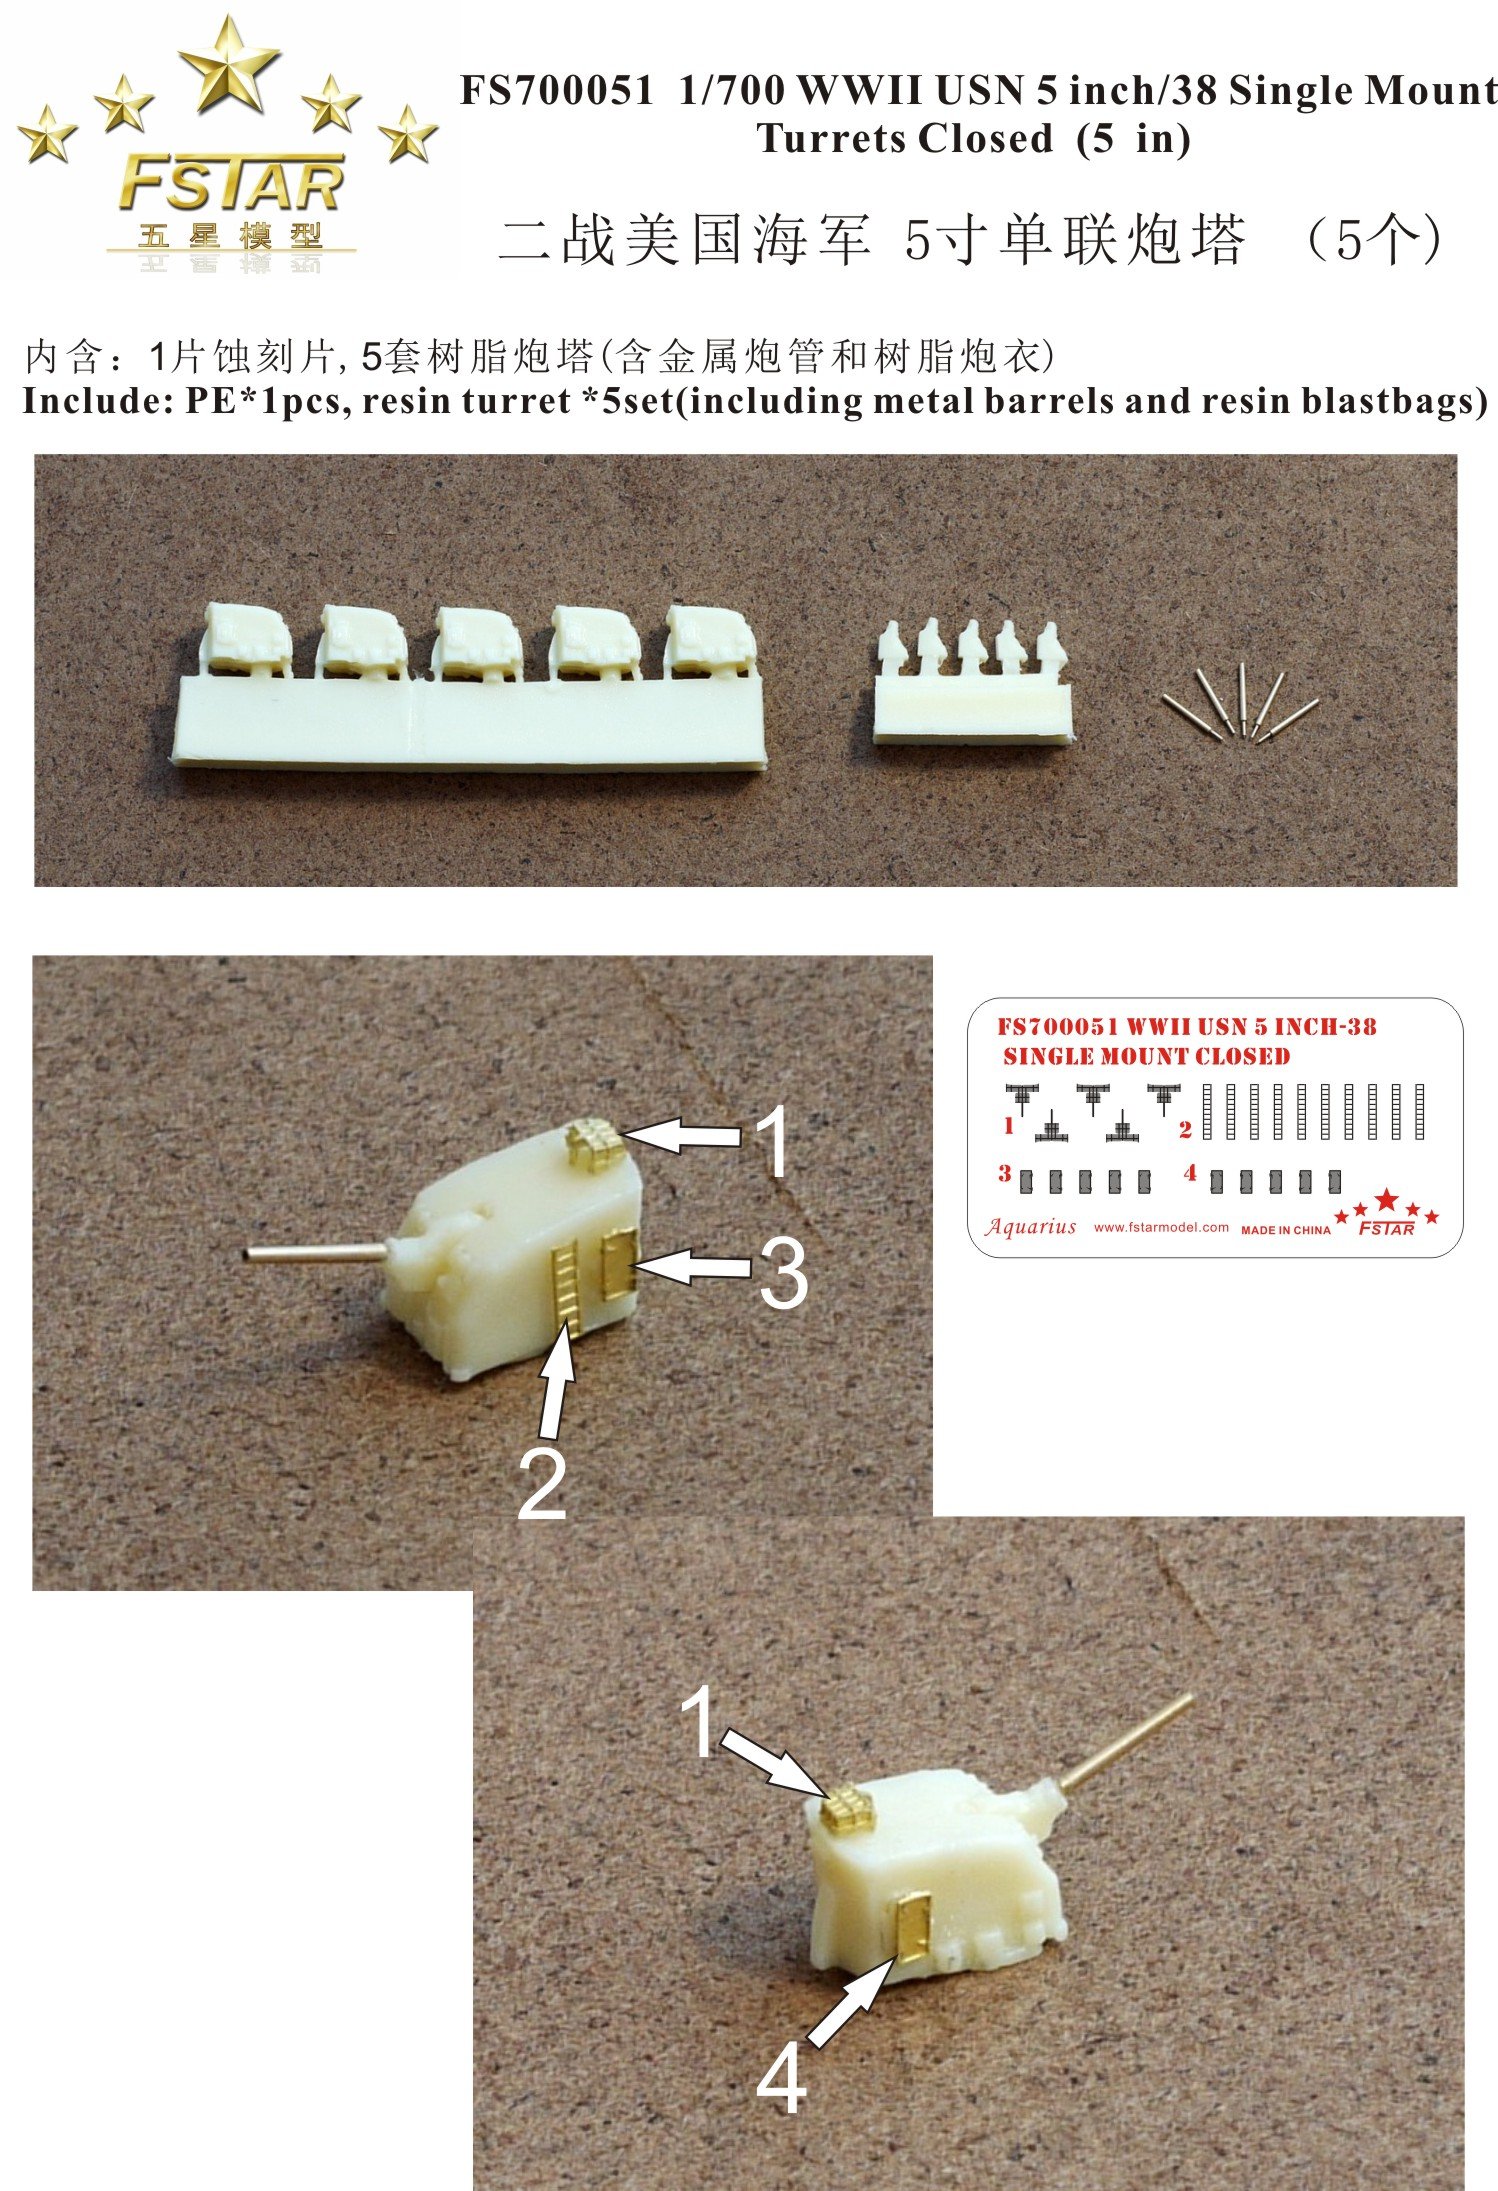 1/700 WWII USN 5 inch L/38 Single Mount Turrets Closed - Click Image to Close